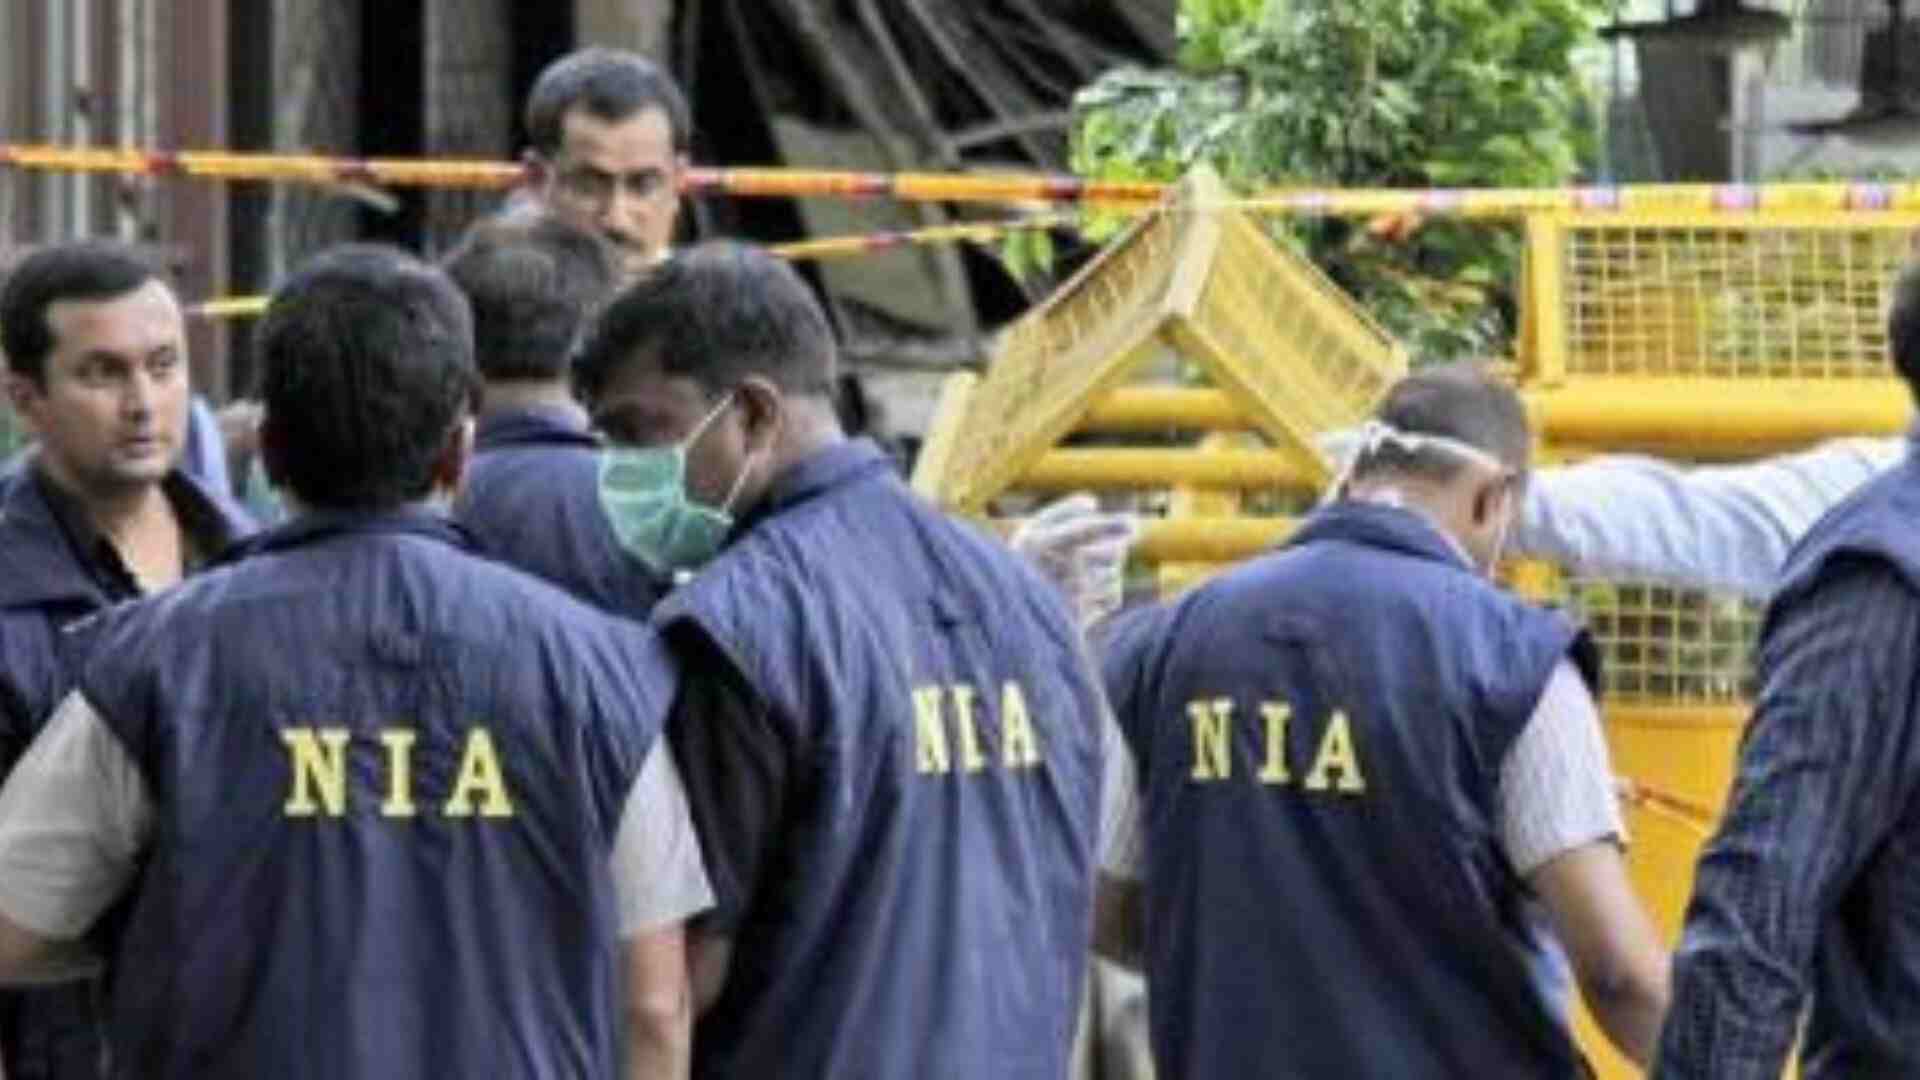 NIA Charges Another In Indian Navy Espionage Led By Pakistan